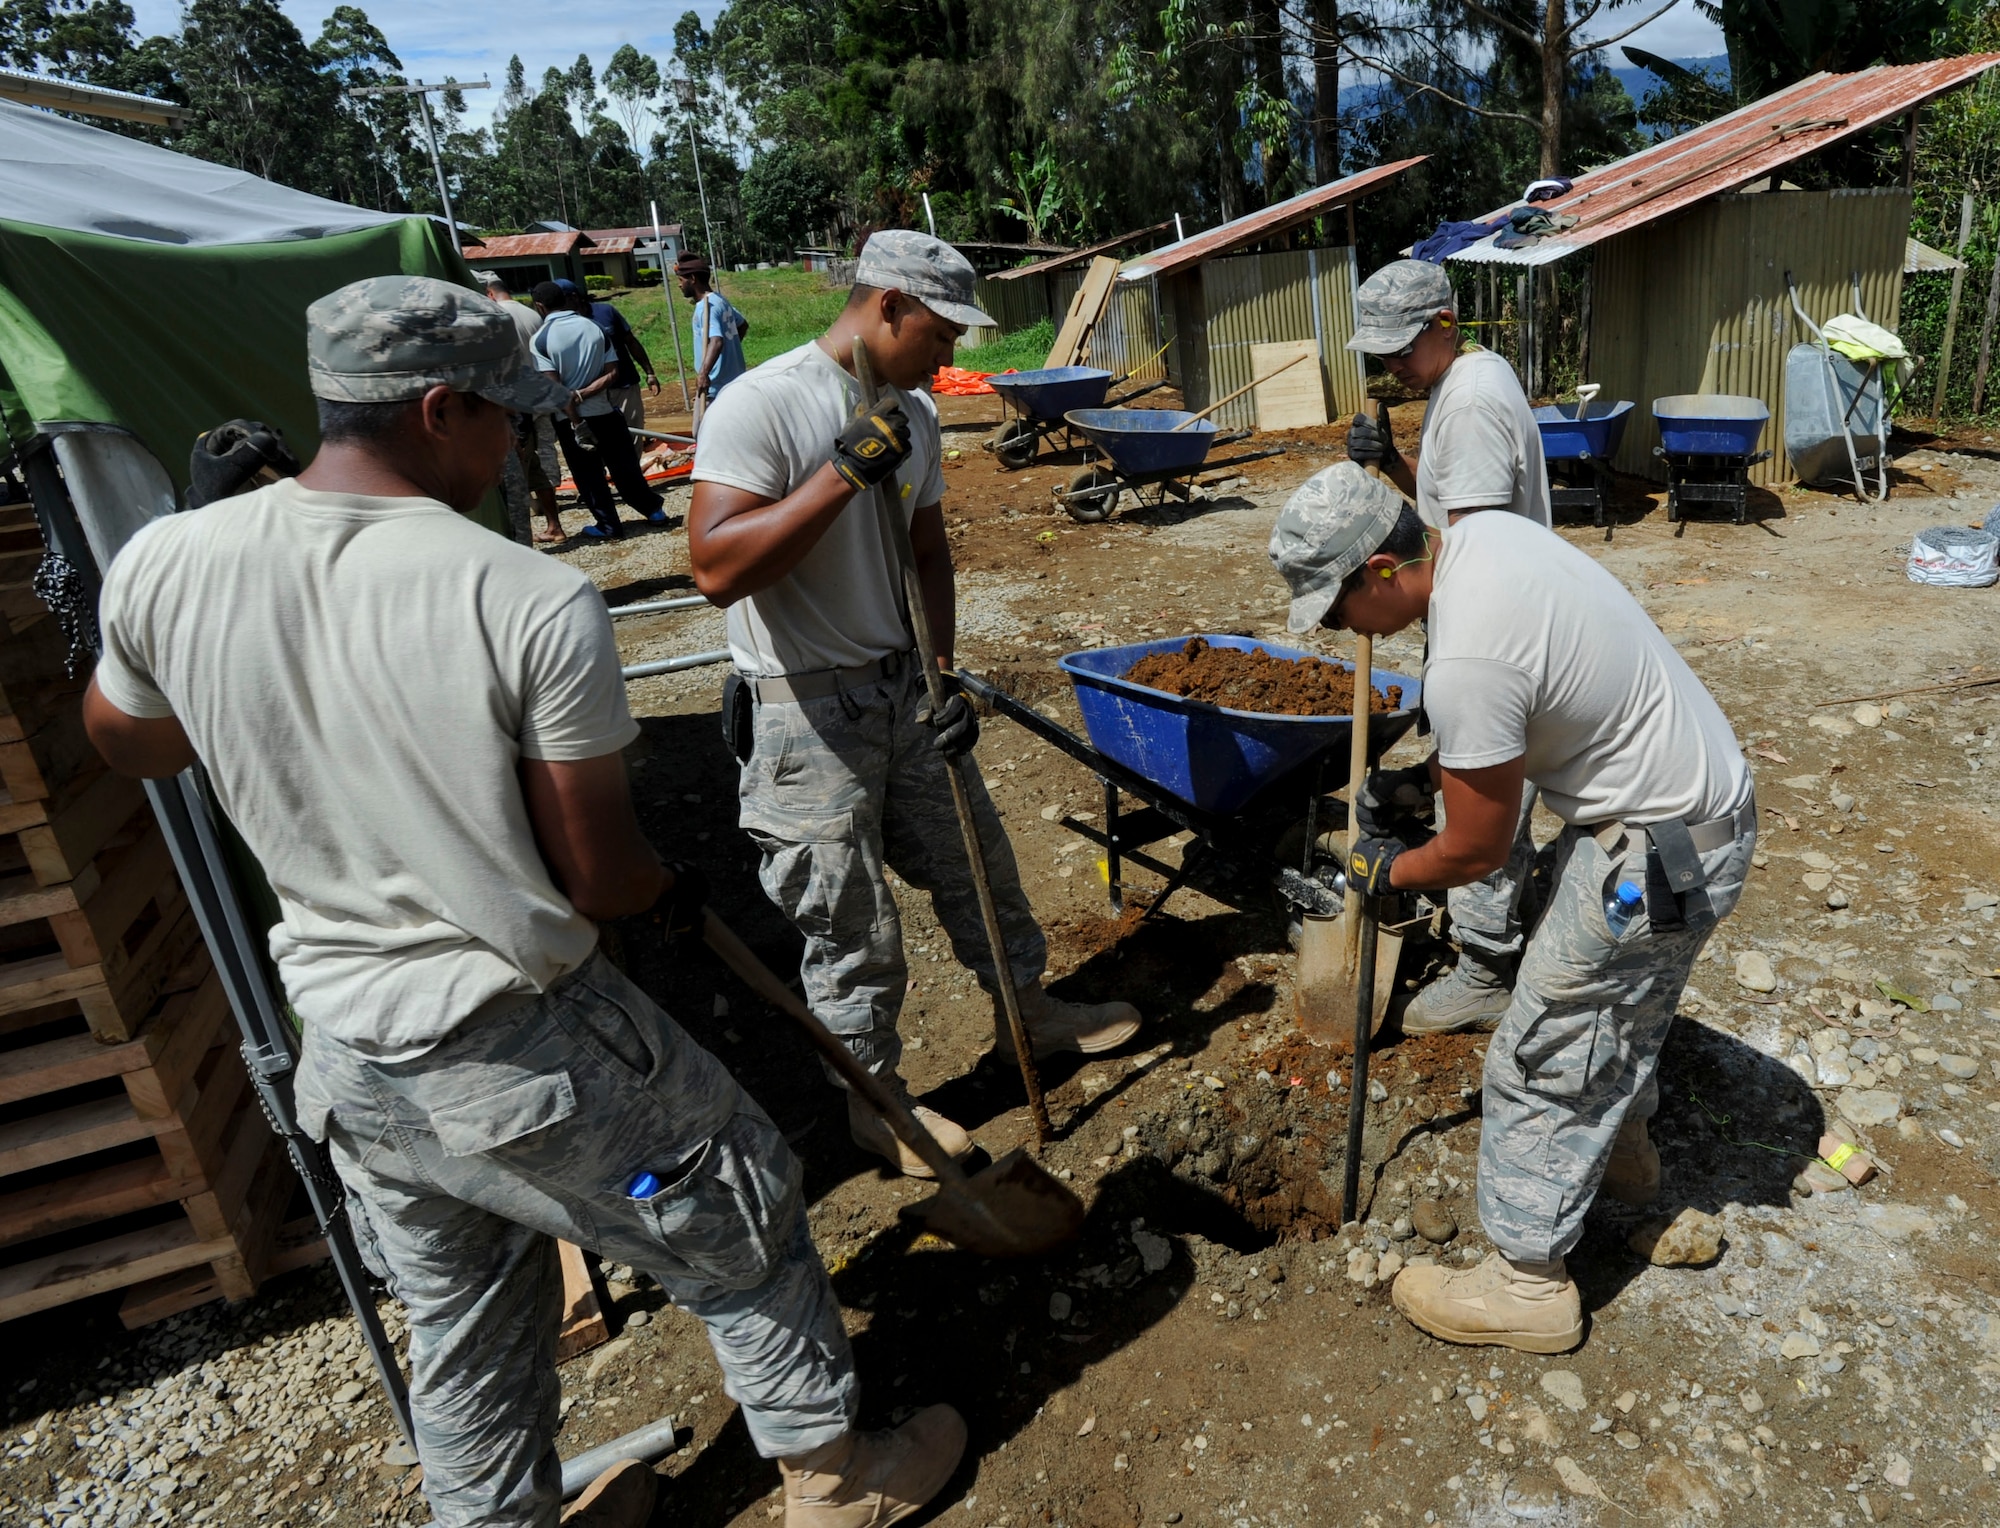 Members of the Hawaii Air National Guard 154th Civil Engineer Squadron have been working on the construction of two new dormitories to be used for female students at Togoba Secondary School in Mount Hagen, Papua New Guinea, as part of Pacific Unity 14-8. PACUNITY helps cultivate common bonds and fosters goodwill between the U.S. and regional nations through multi-lateral humanitarian assistance and civil military operations.  (U.S. Air Force photo by Tech. Sgt. Terri Paden/Released)                               